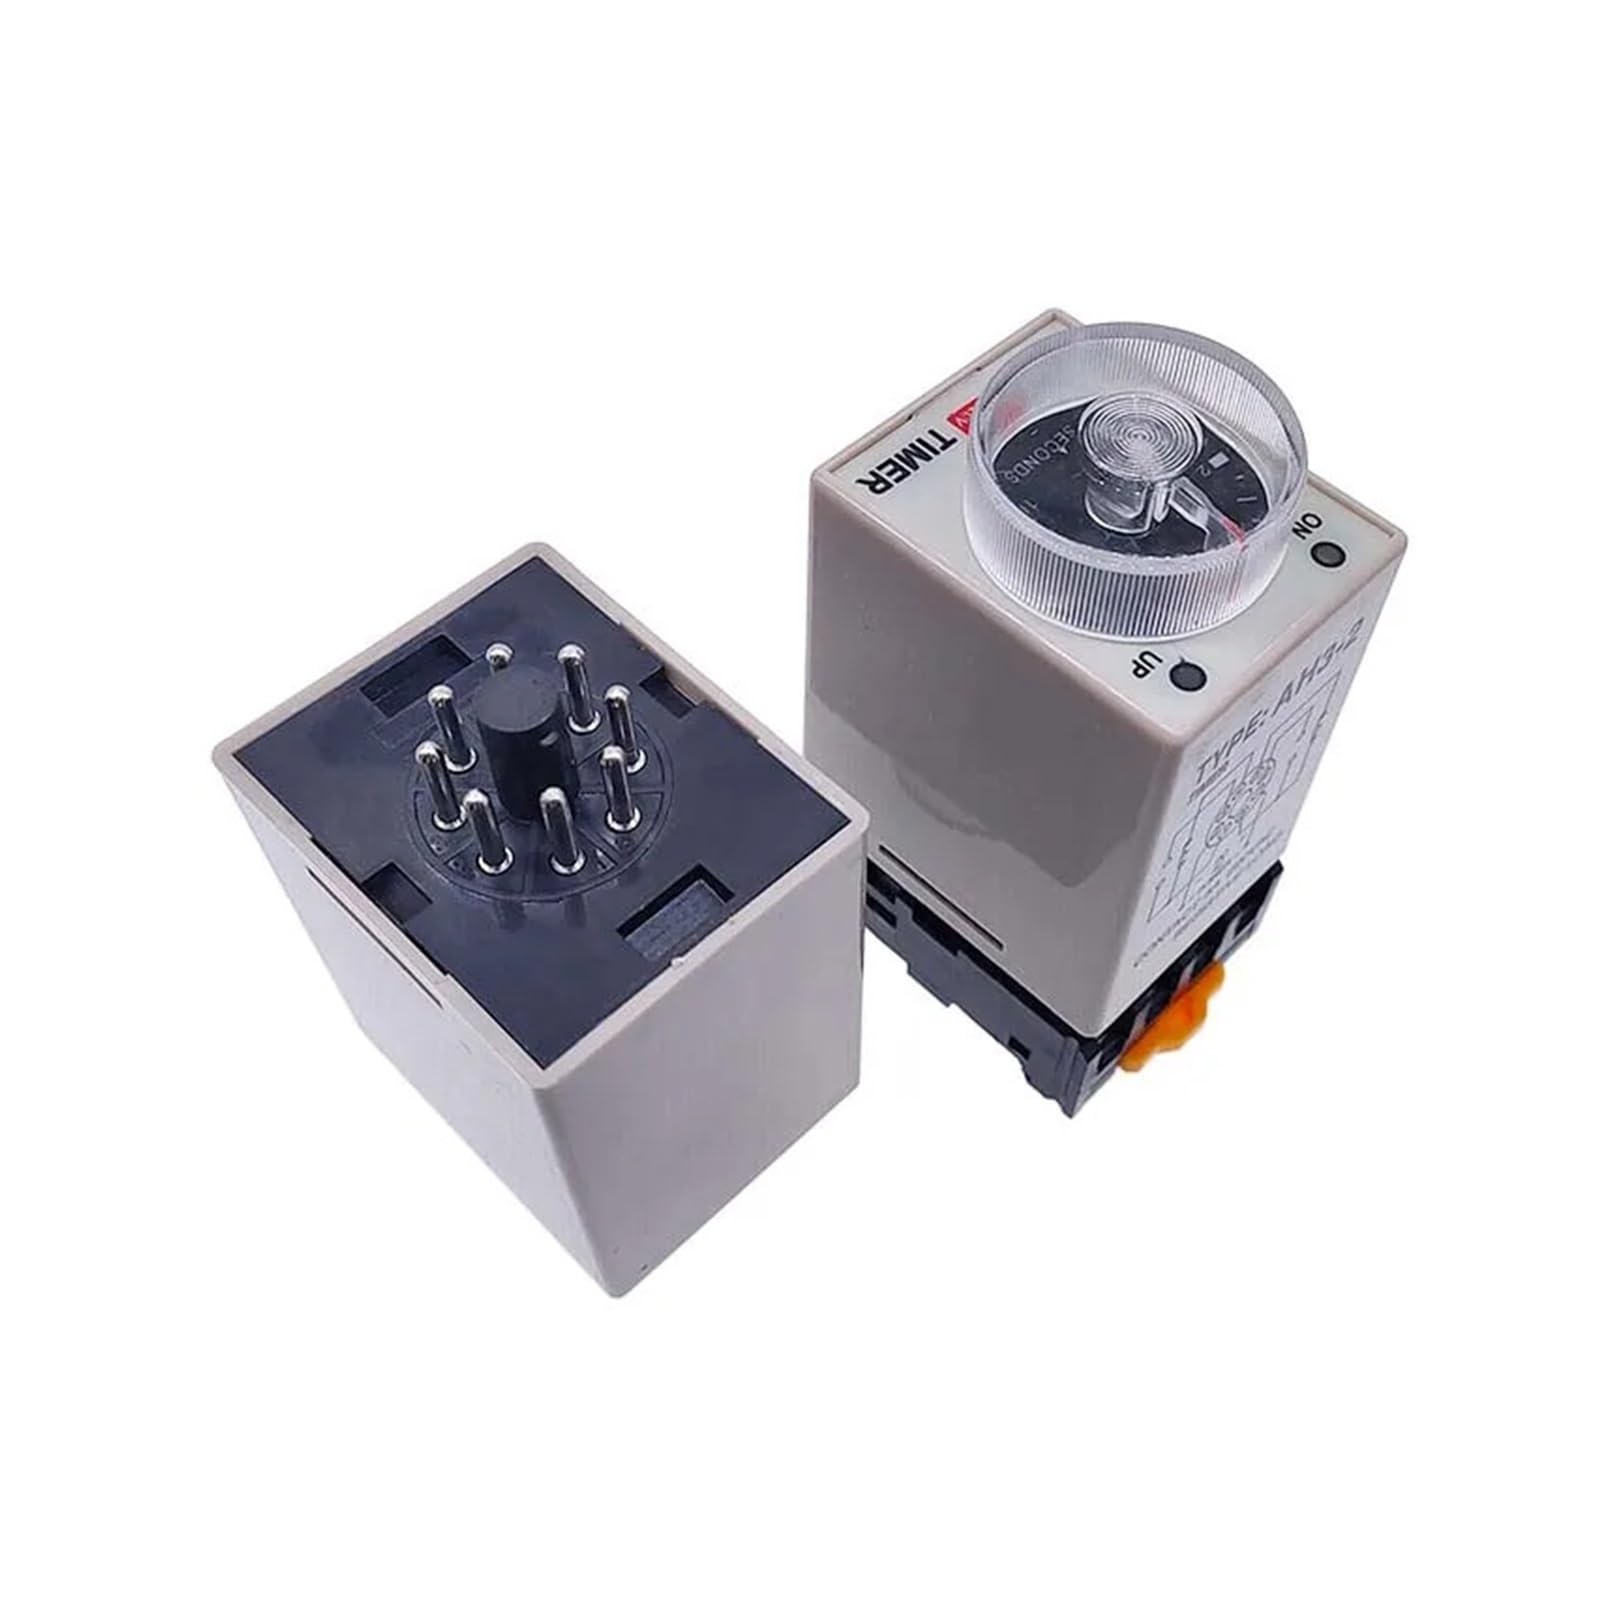 1 PC AH3-2 Power-on Delay Timer AH3-3 Time Relay AC Thick Stitch Time Set Range 1S/5S/10S/30S/60S/5M/10M/30M NWPNLXEA(AC220V,AH3-2 0-30Seconds) von NWPNLXEA